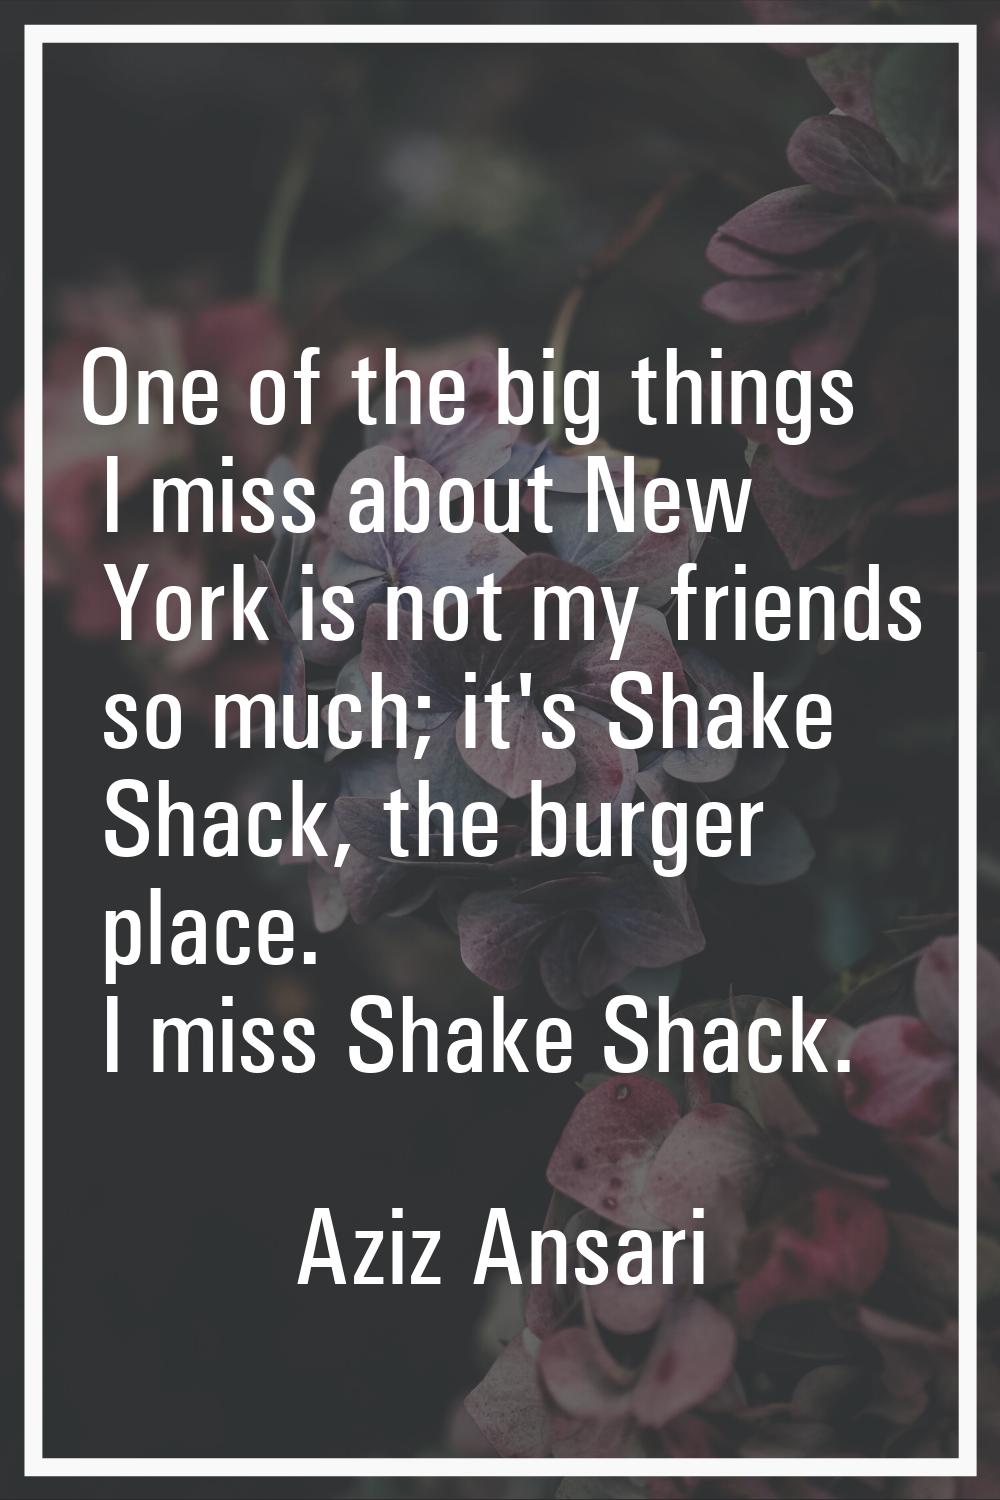 One of the big things I miss about New York is not my friends so much; it's Shake Shack, the burger